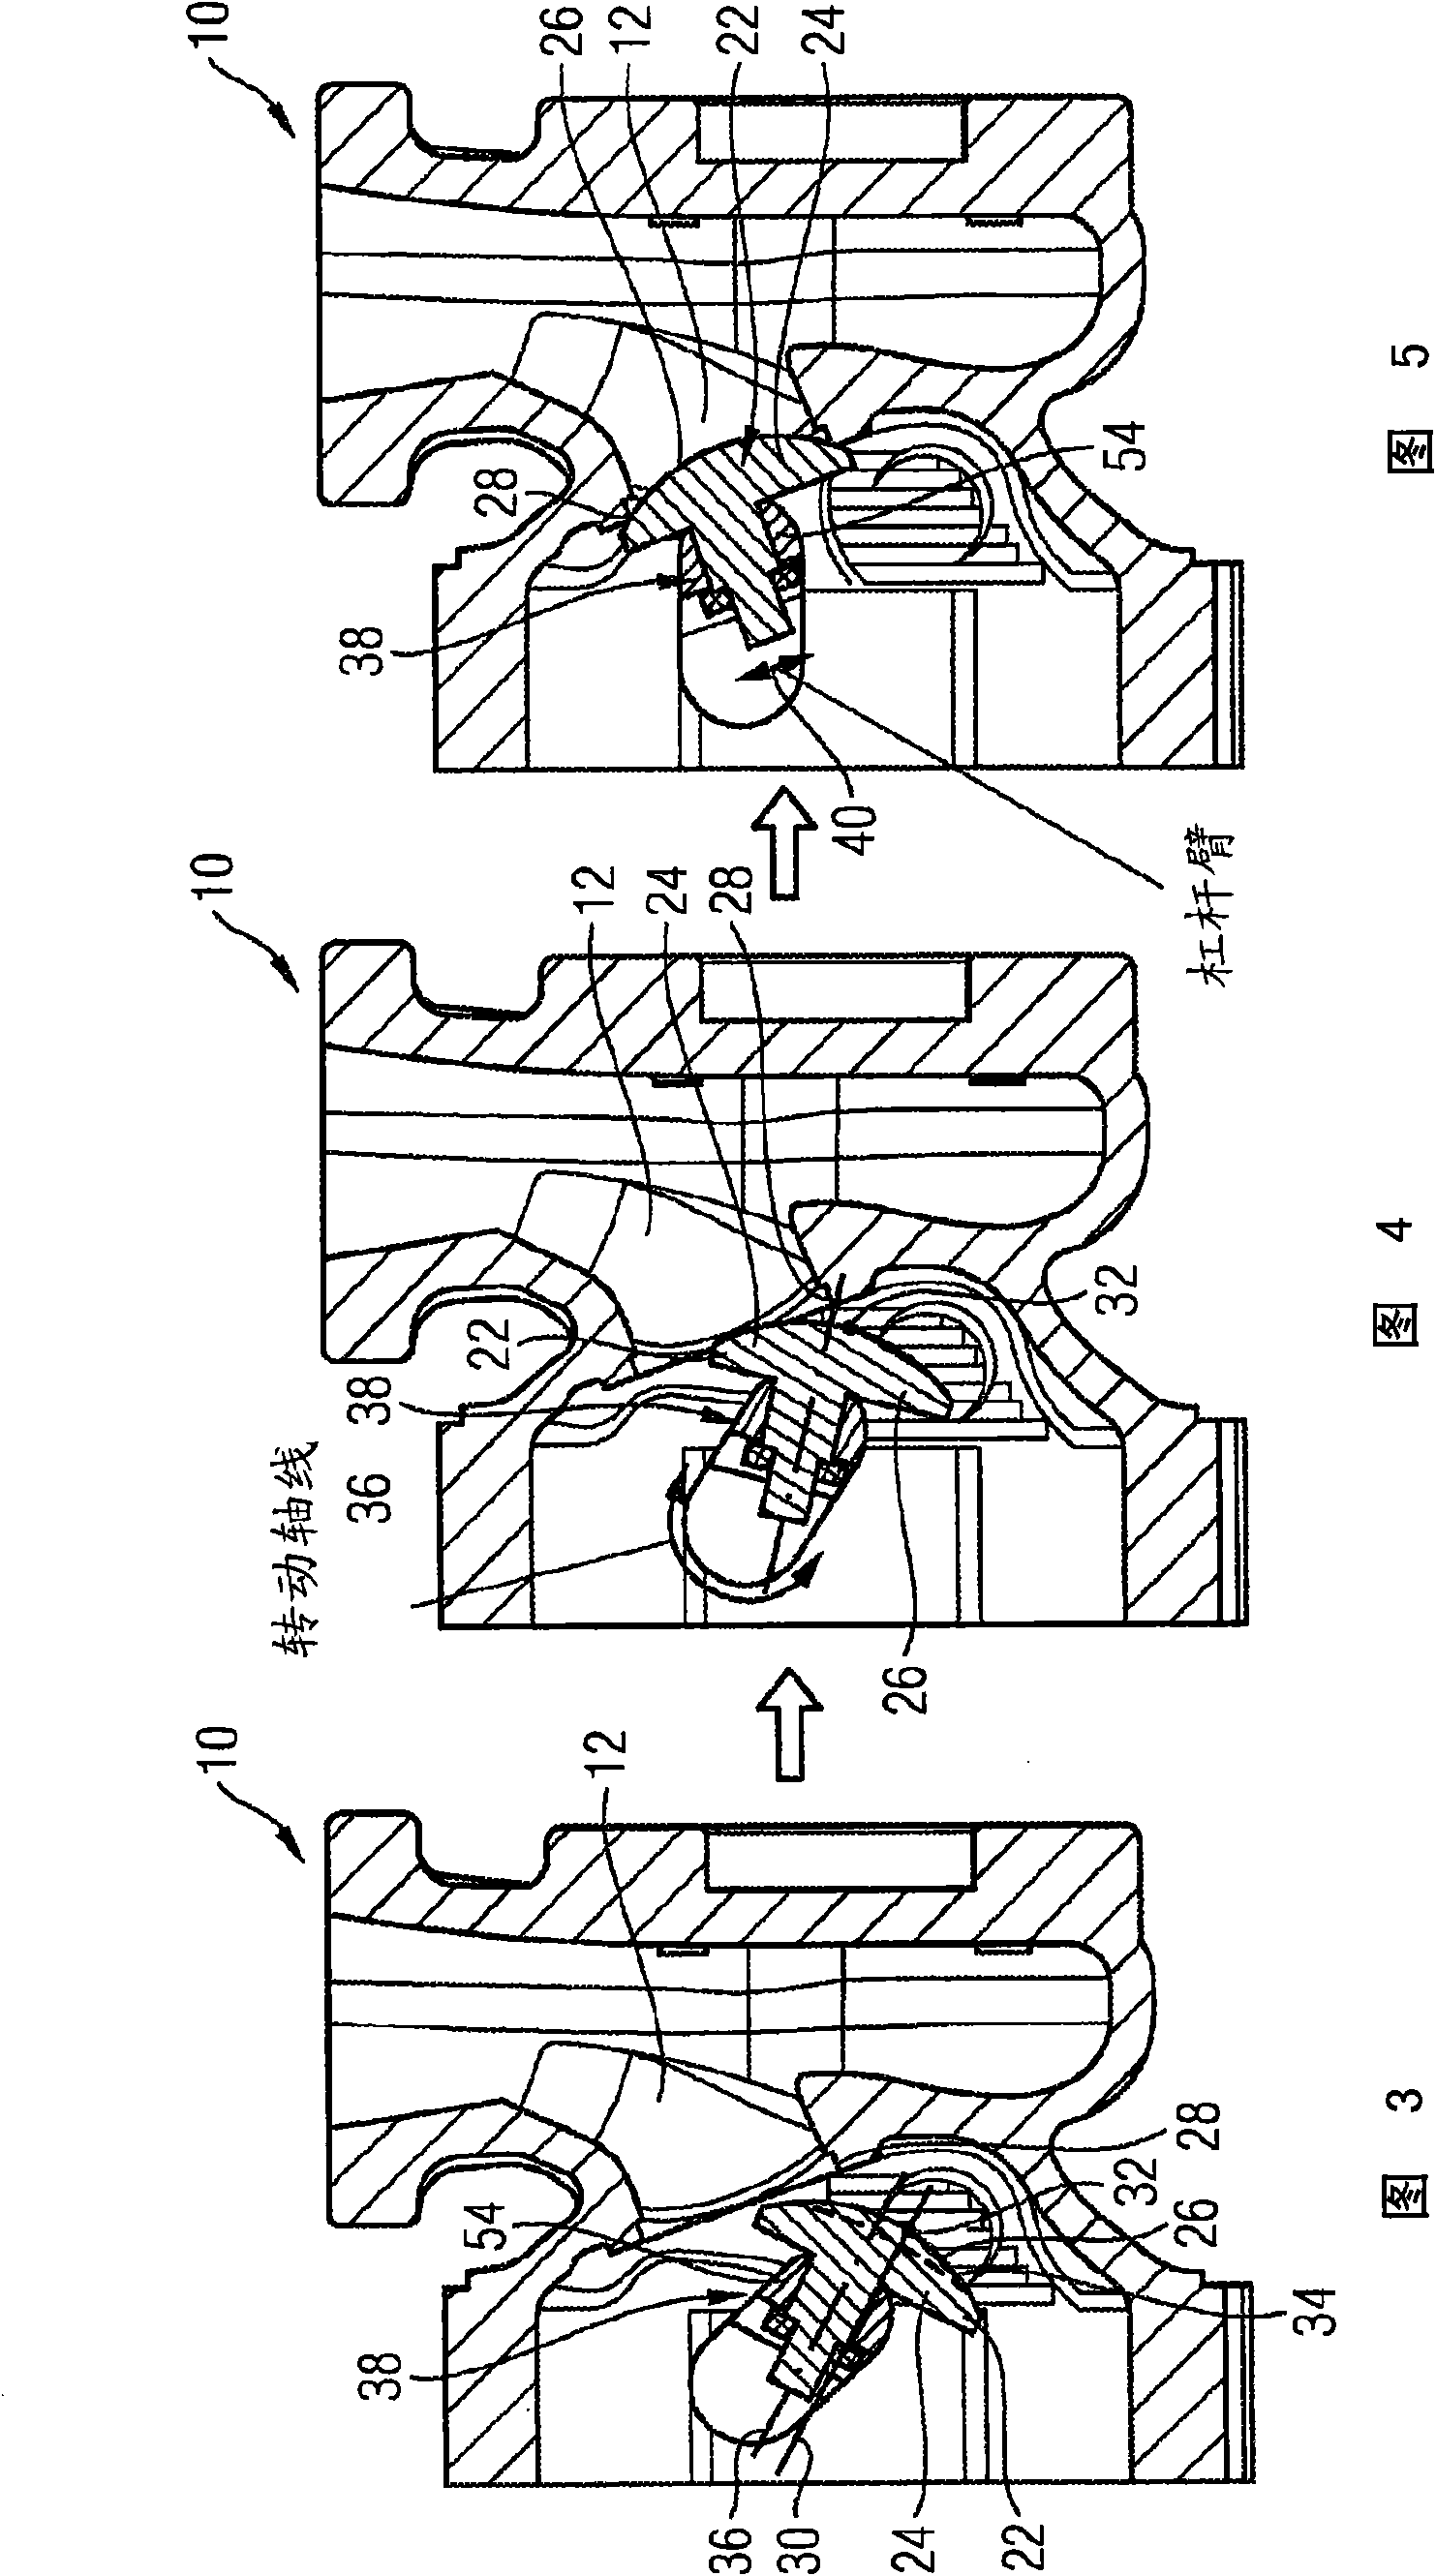 Turbocharger comprising an actuator for opening and closing a wastegate duct